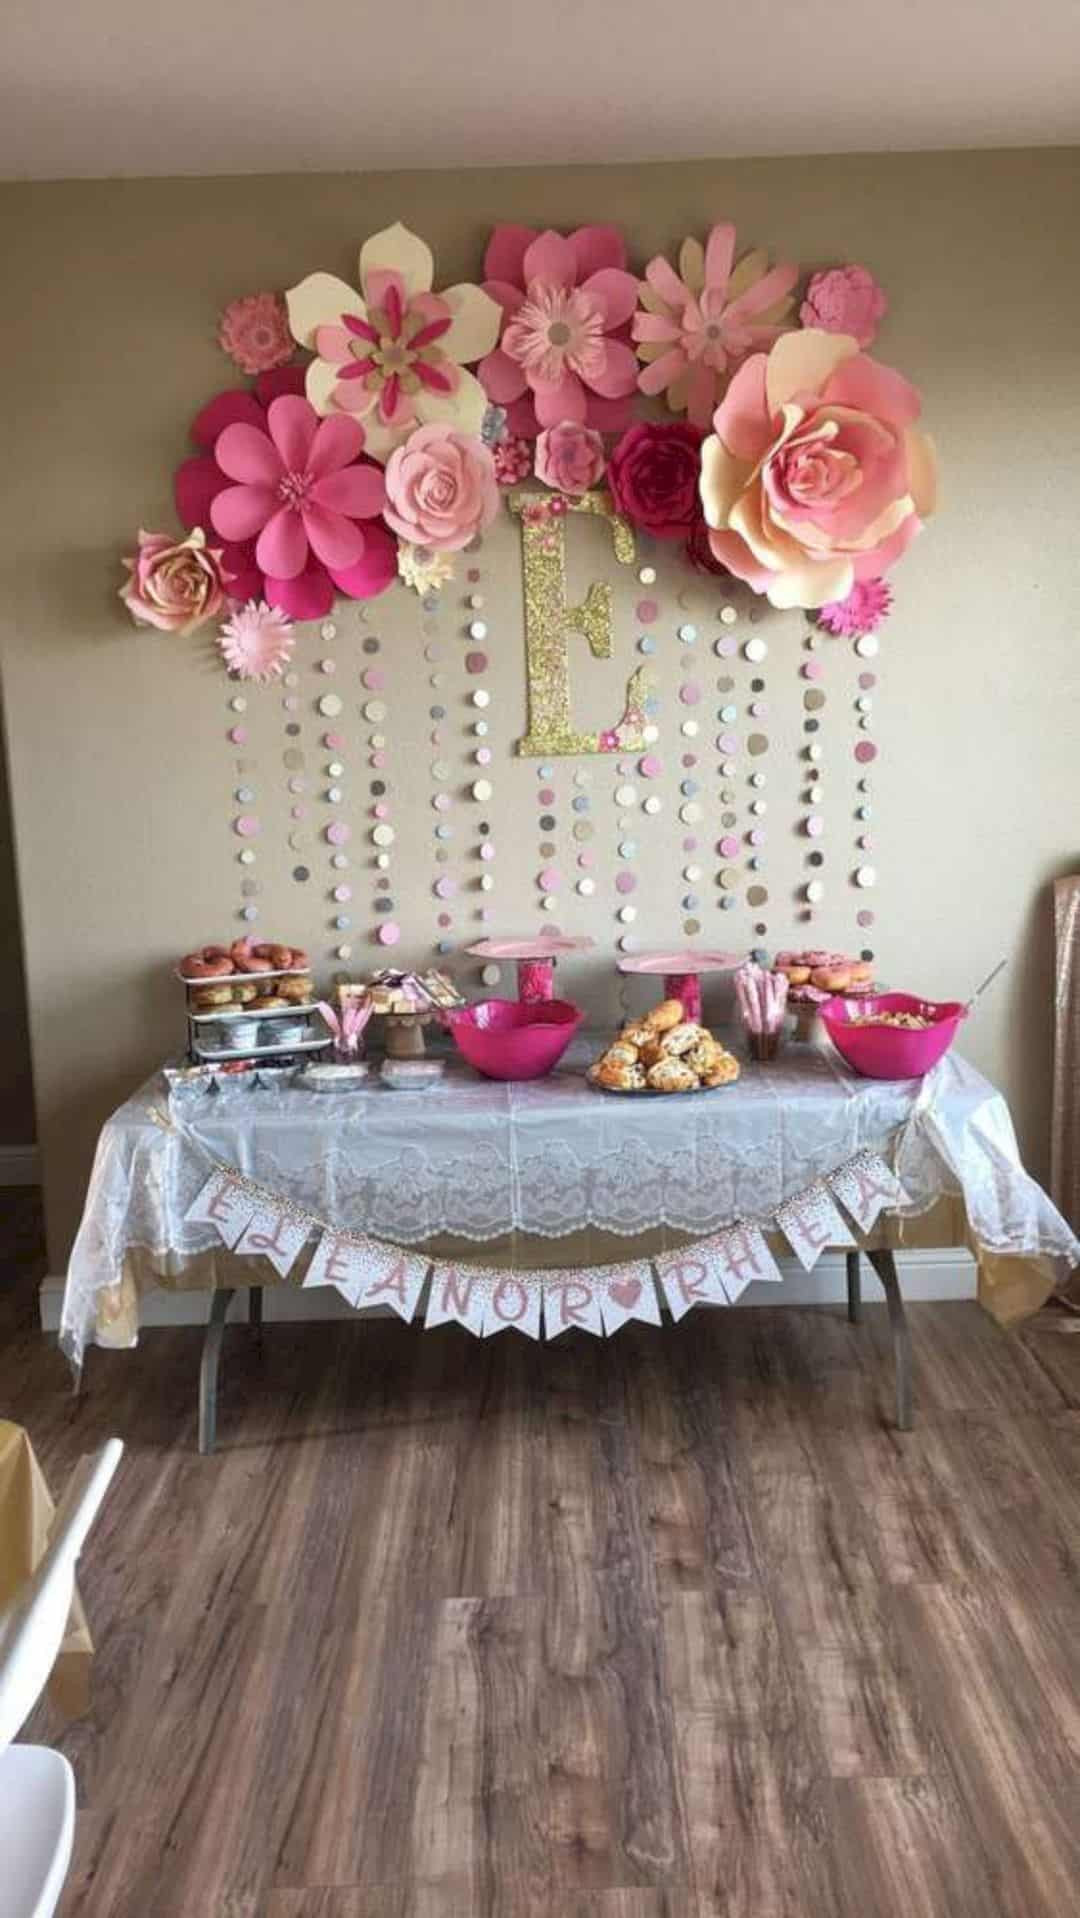 Baby Shower Decor Ideas For Girls
 16 Cute Baby Shower Decorating Ideas